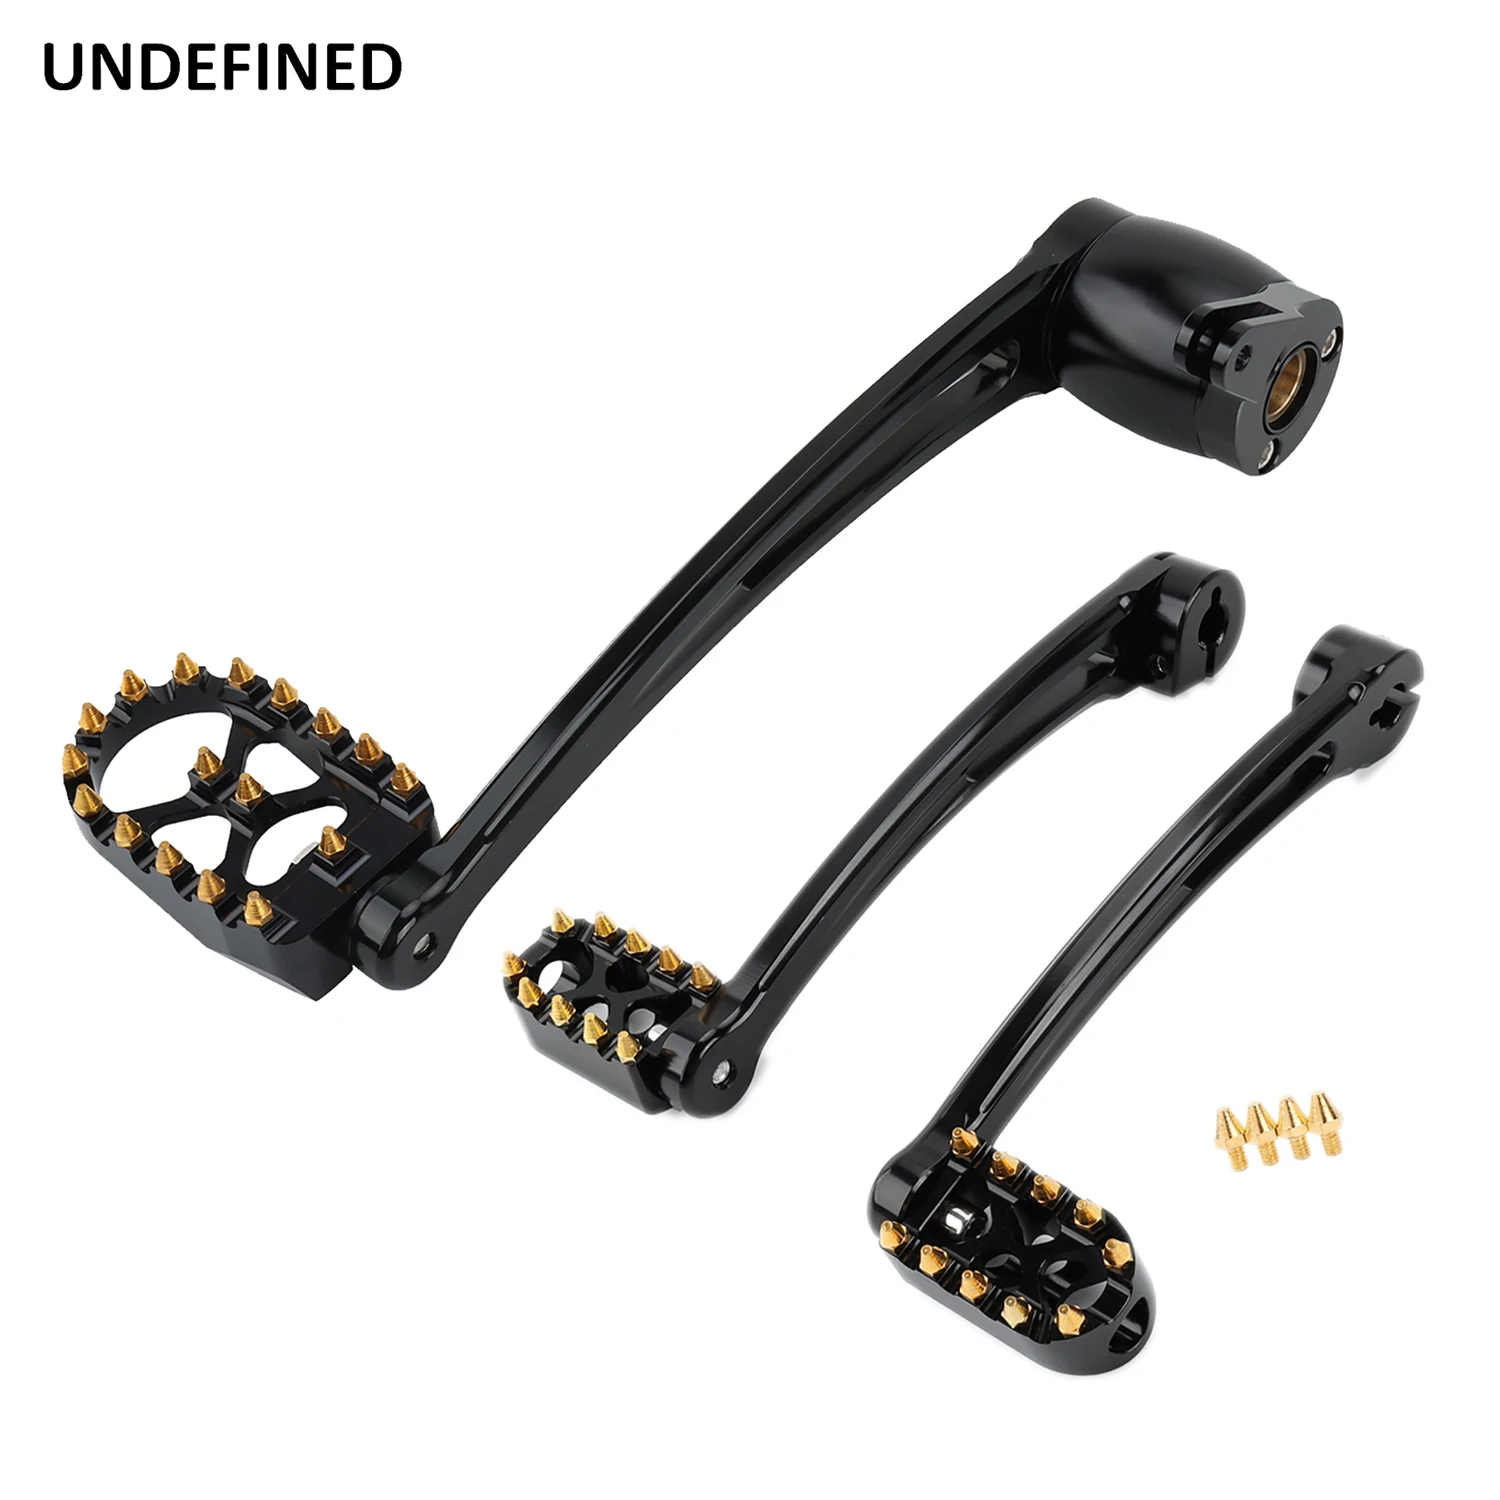 Mx brake arm peg pedal heel toe gear shift lever shifter pegs for harley touring road thumb200